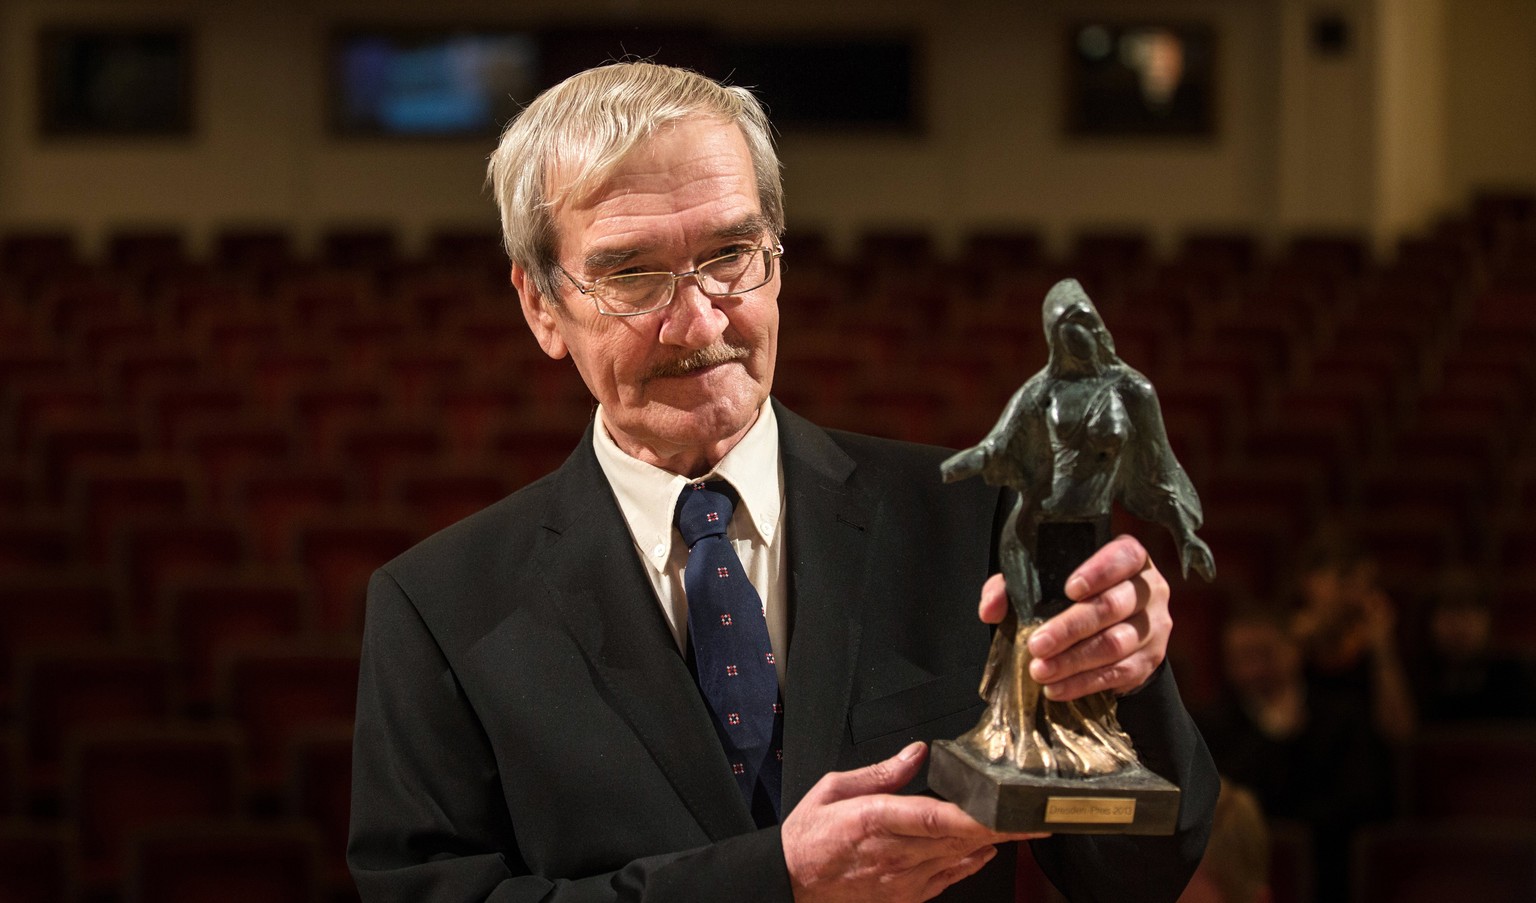 epa06213197 (FILE) - Former Soviet officer Stanislav Petrov holds the Dresden Prize at the Semper Opera, in Dresden, Germany, 17 February 2013 (reissued 19 September 2017). According to reports from 1 ...